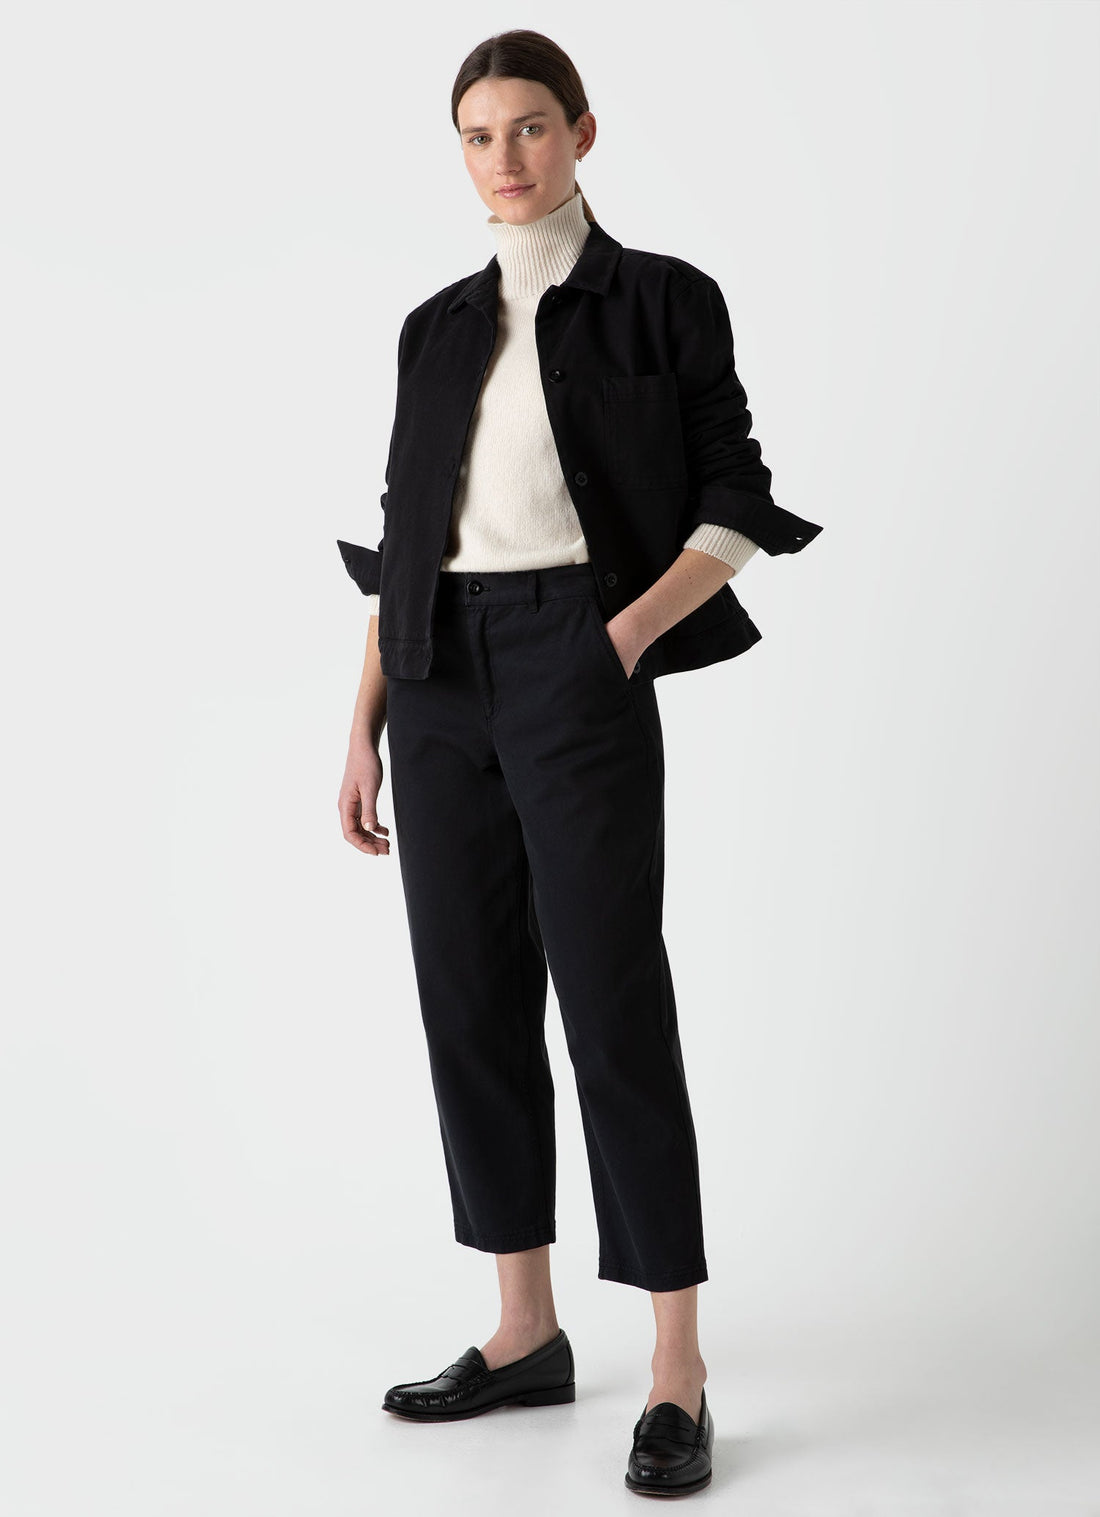 Women's Cotton Tapered Trouser in Black